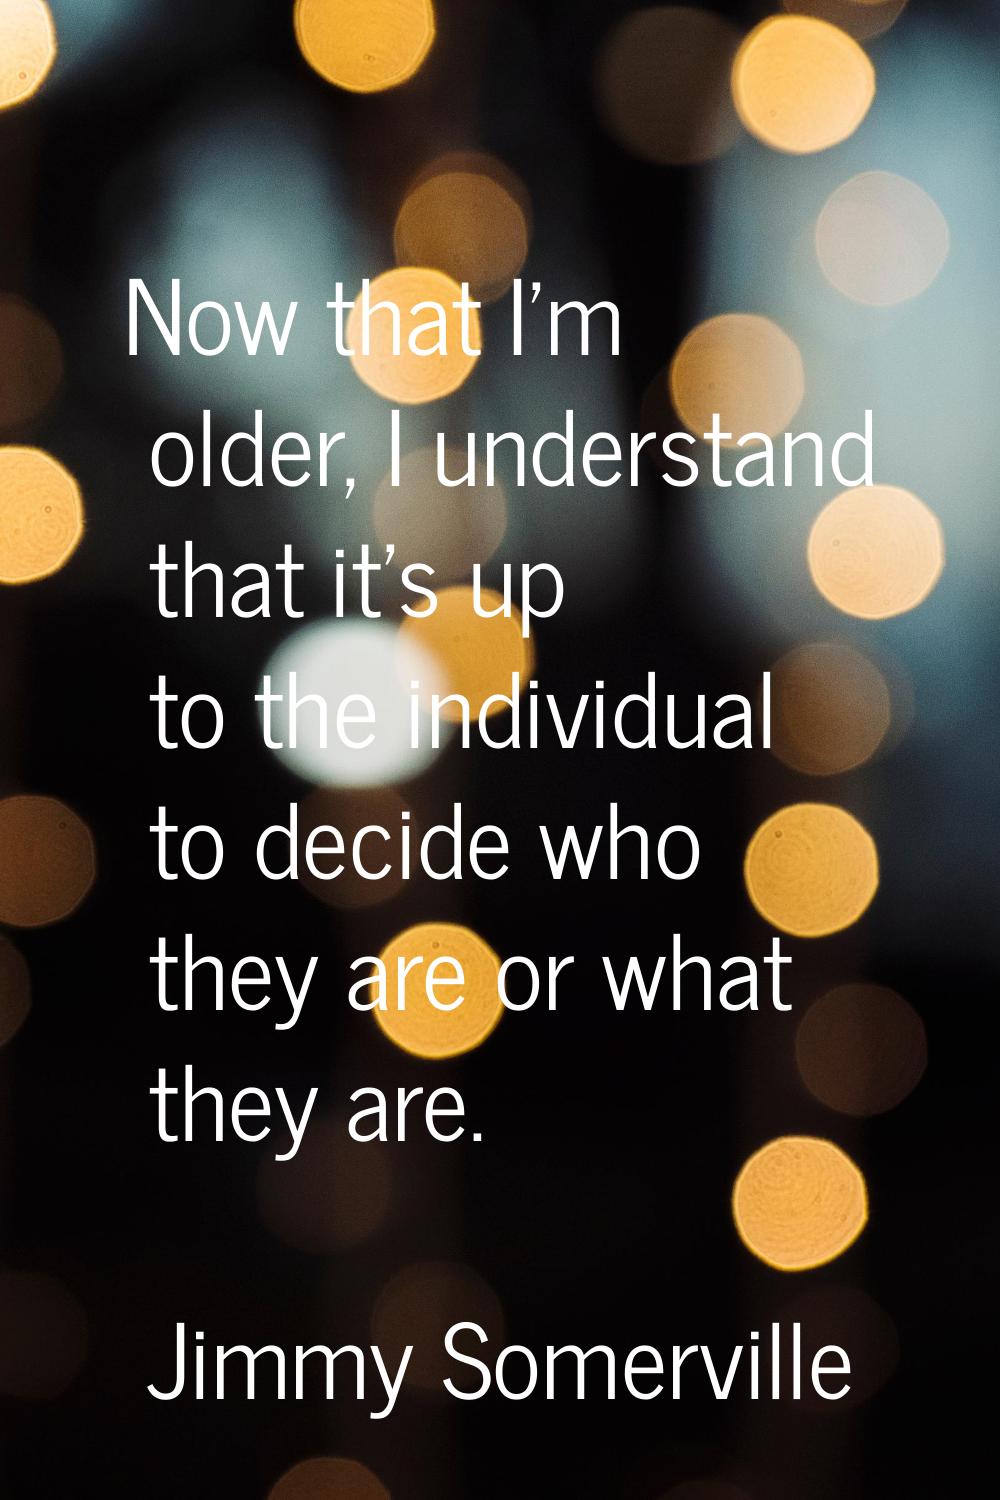 Now that I'm older, I understand that it's up to the individual to decide who they are or what they